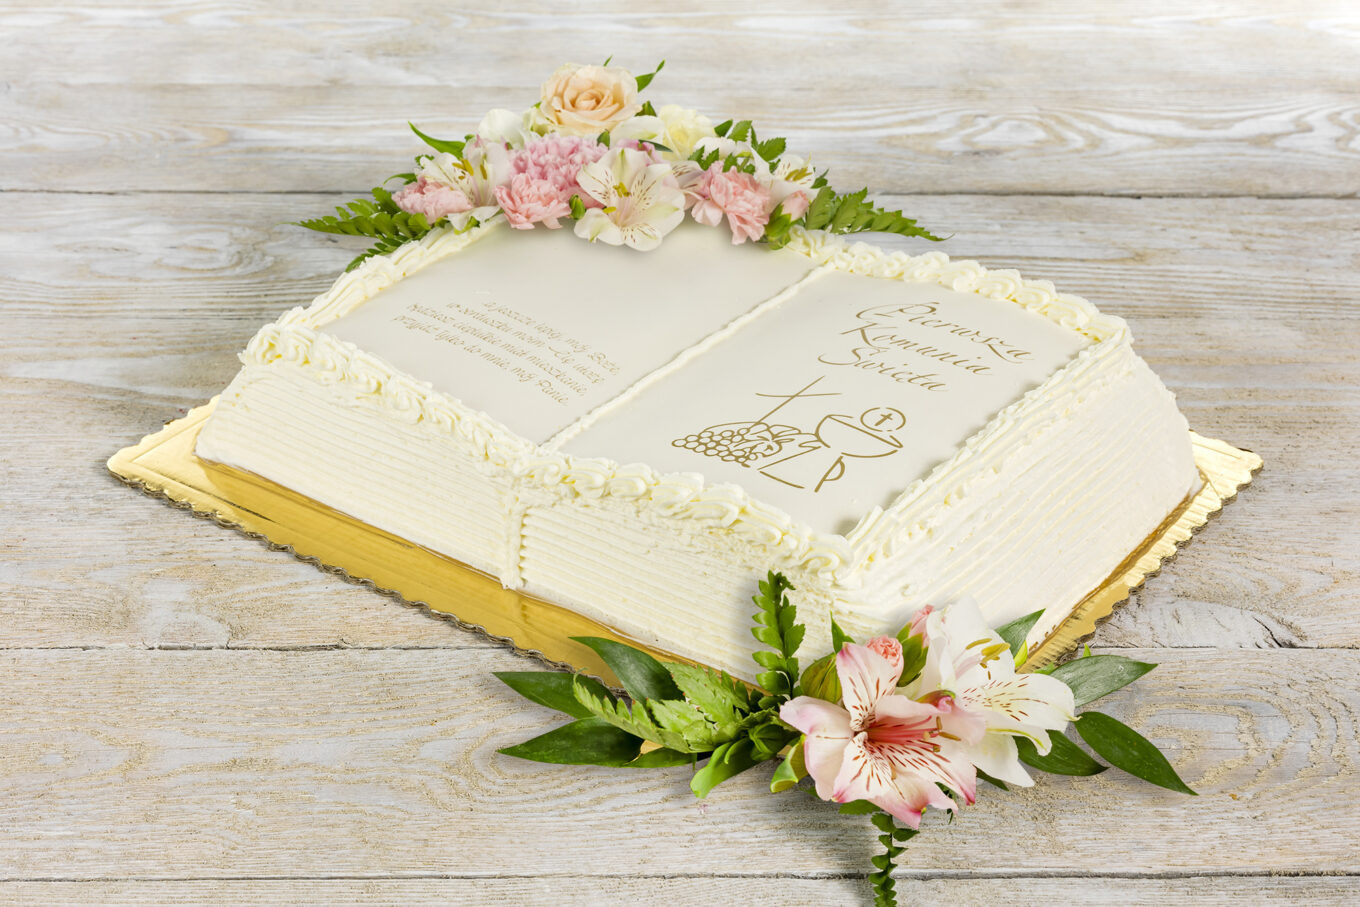 book cake with flowers for communion Cukiernia Jacek Placek is synonymous with the taste of homemade cakes made of natural products.